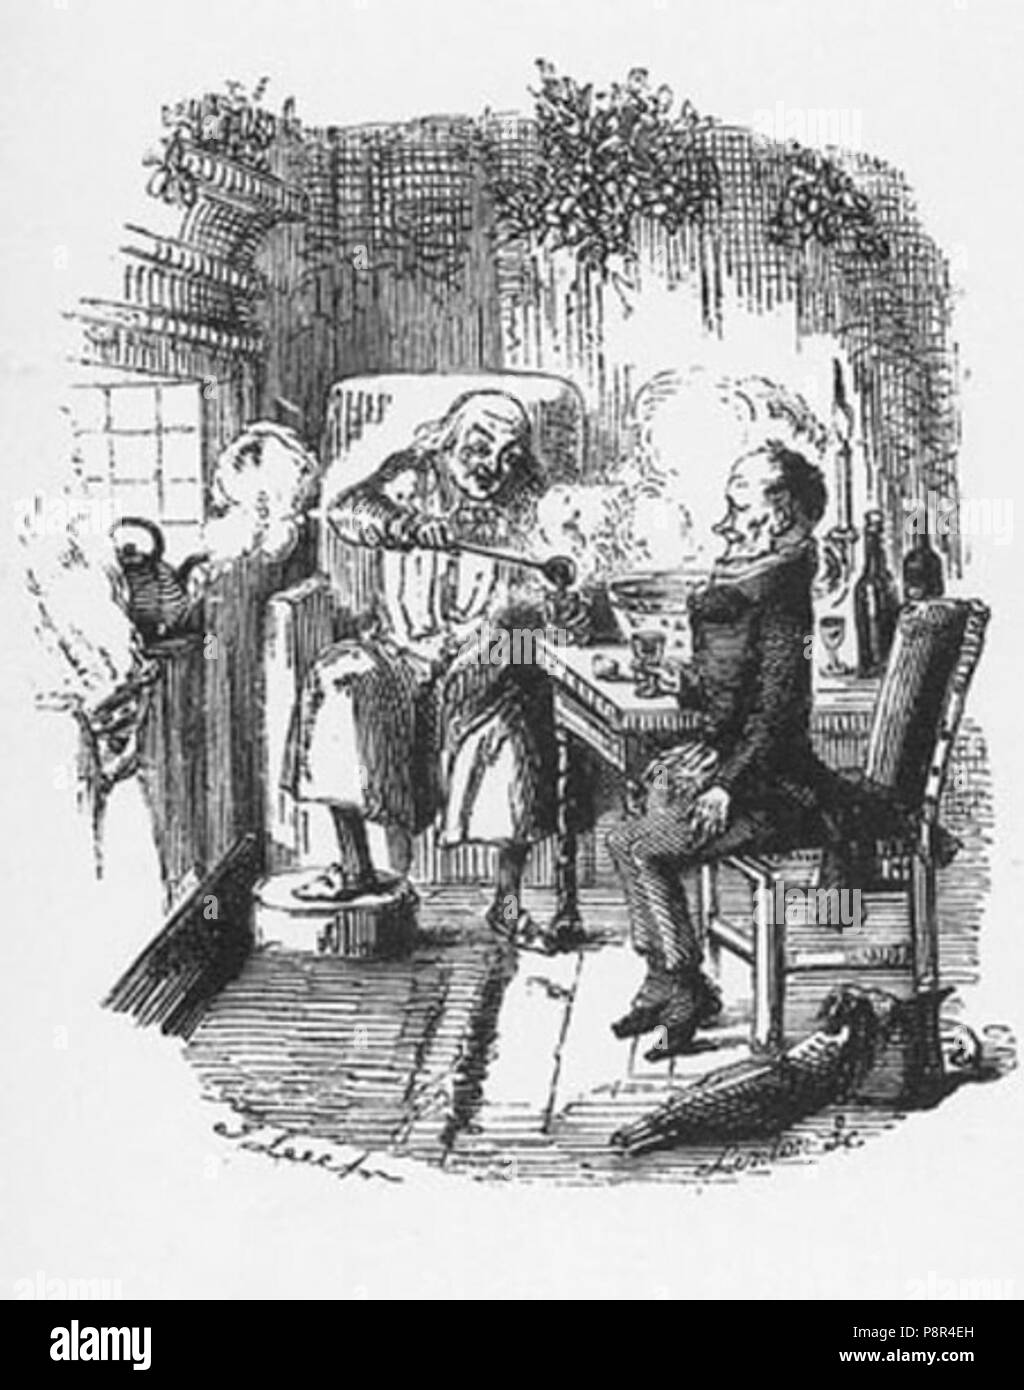 Bob cratchit scrooge Black and White Stock Photos & Images - Alamy